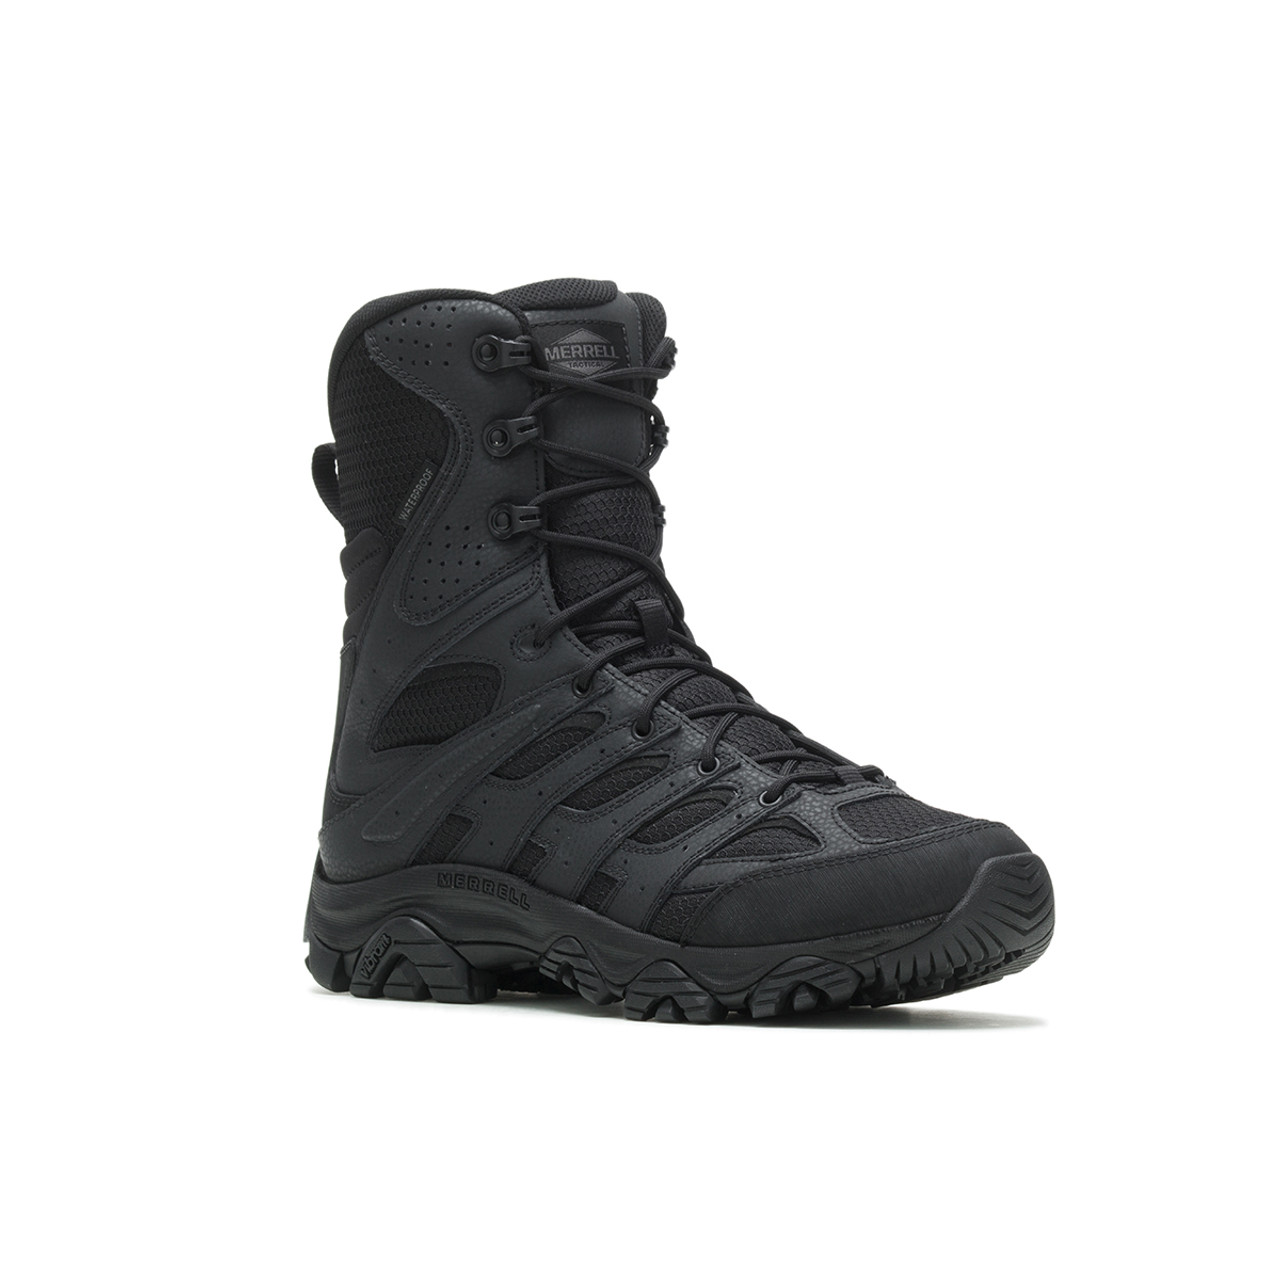 Merrell Moab 3 Thermo Mid Waterproof Winter Boots - Men's | MEC